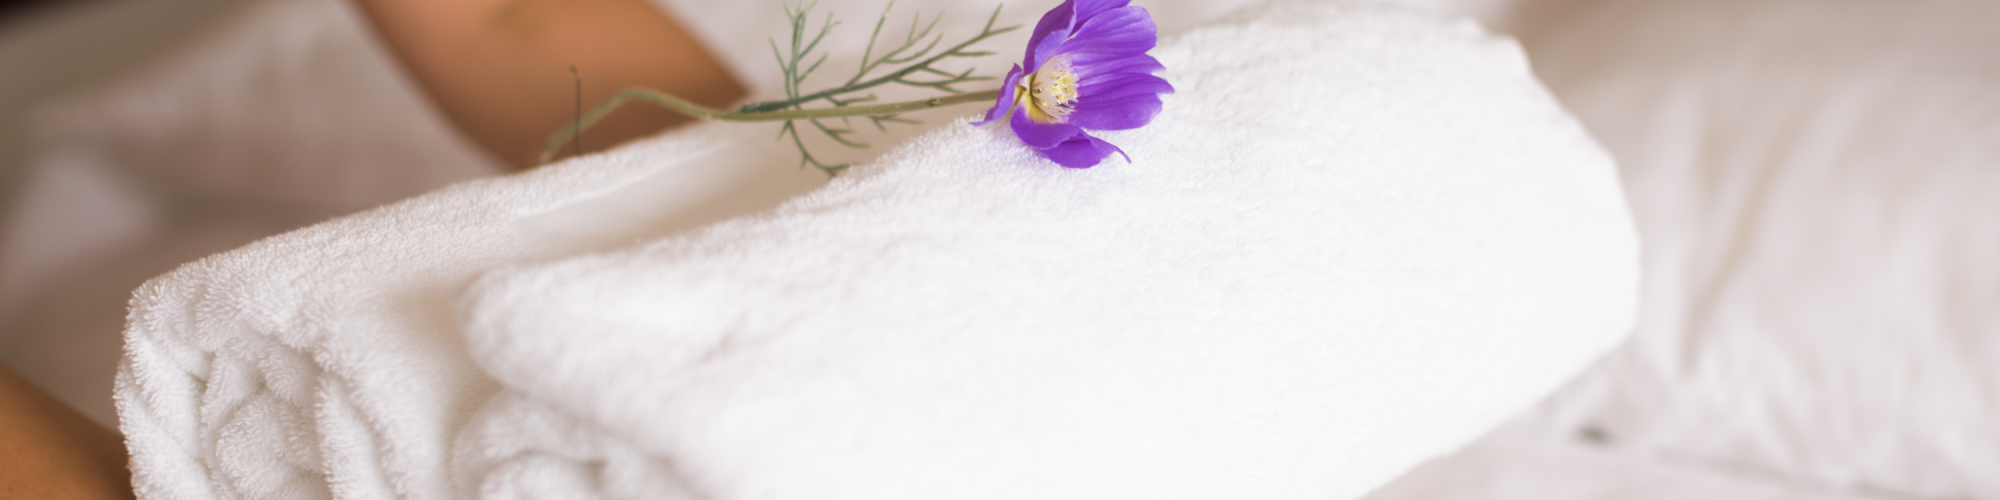 The image shows two rolled white towels with a purple flower placed on top, being held by hands against a blurred background.